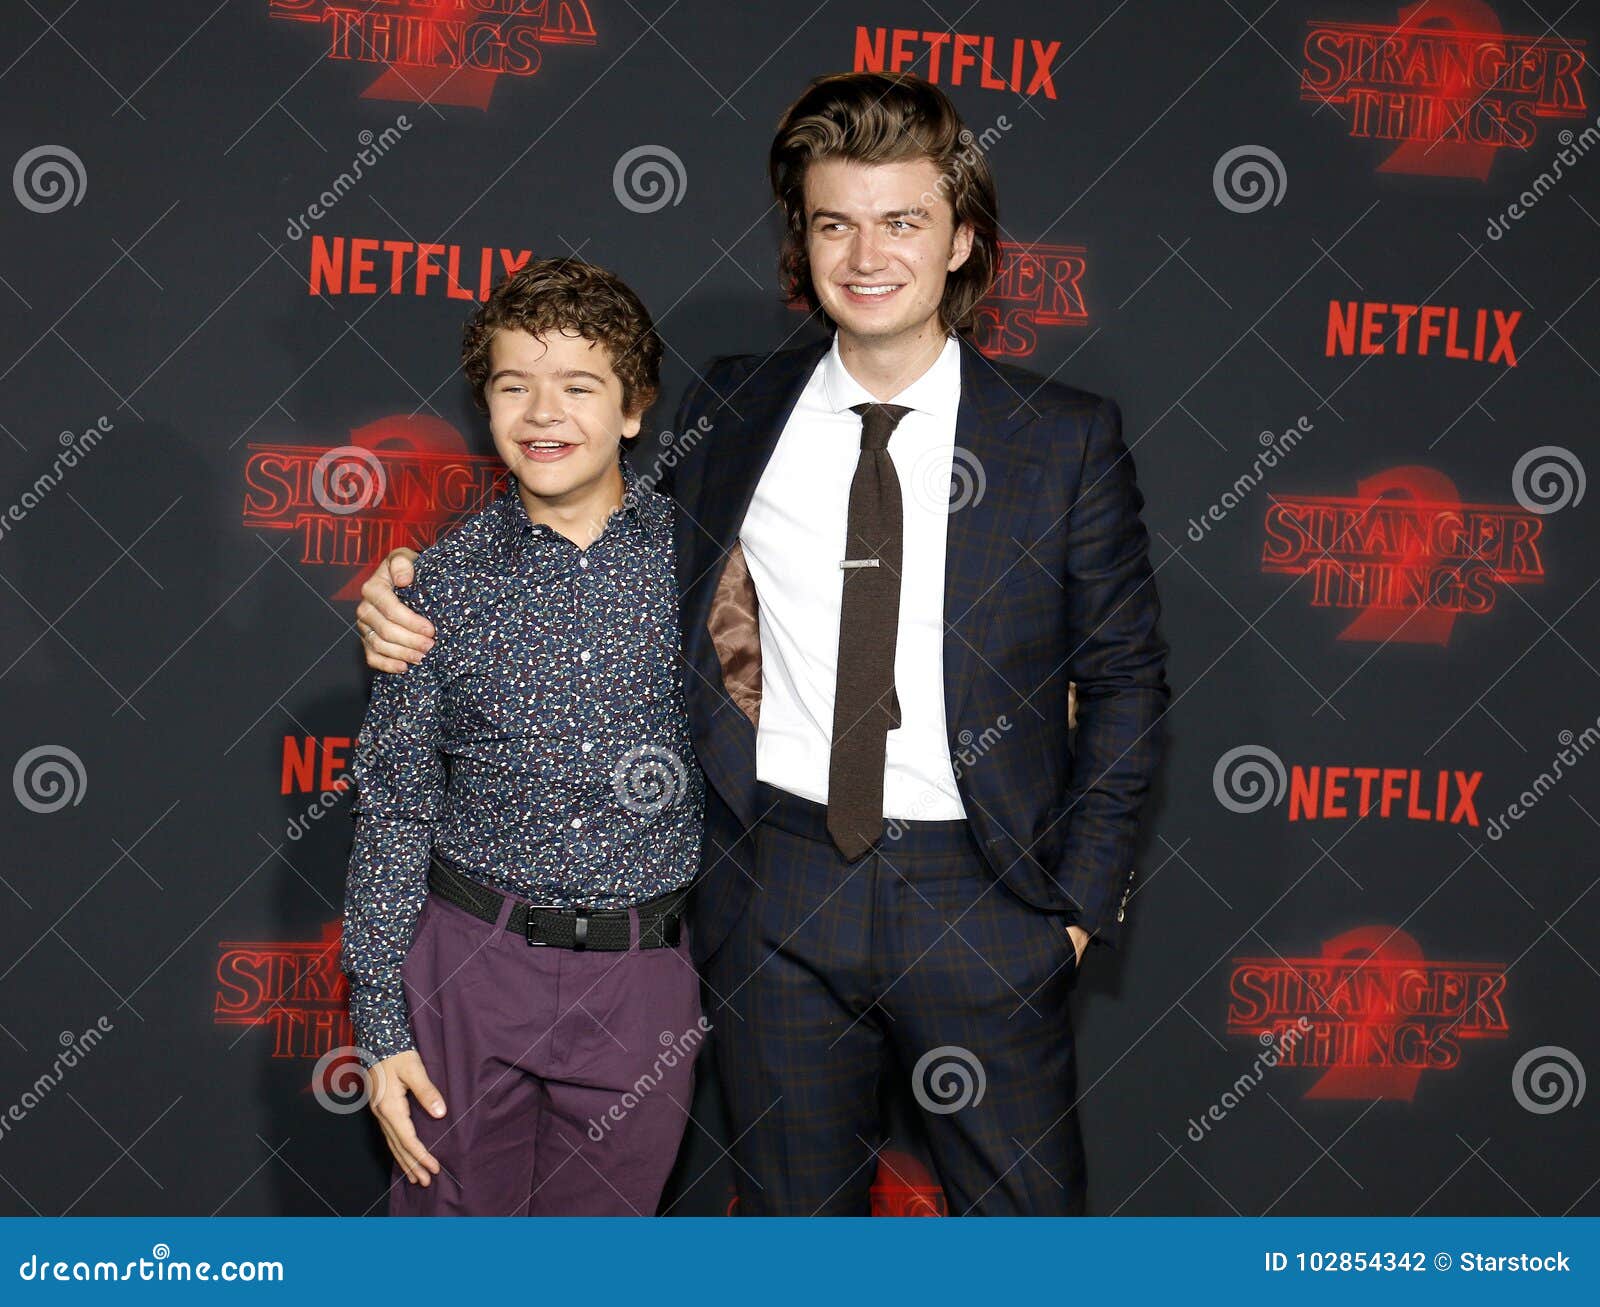 Joe Keery and Finn Wolfhard on the Strangest Thing of All: Social Media